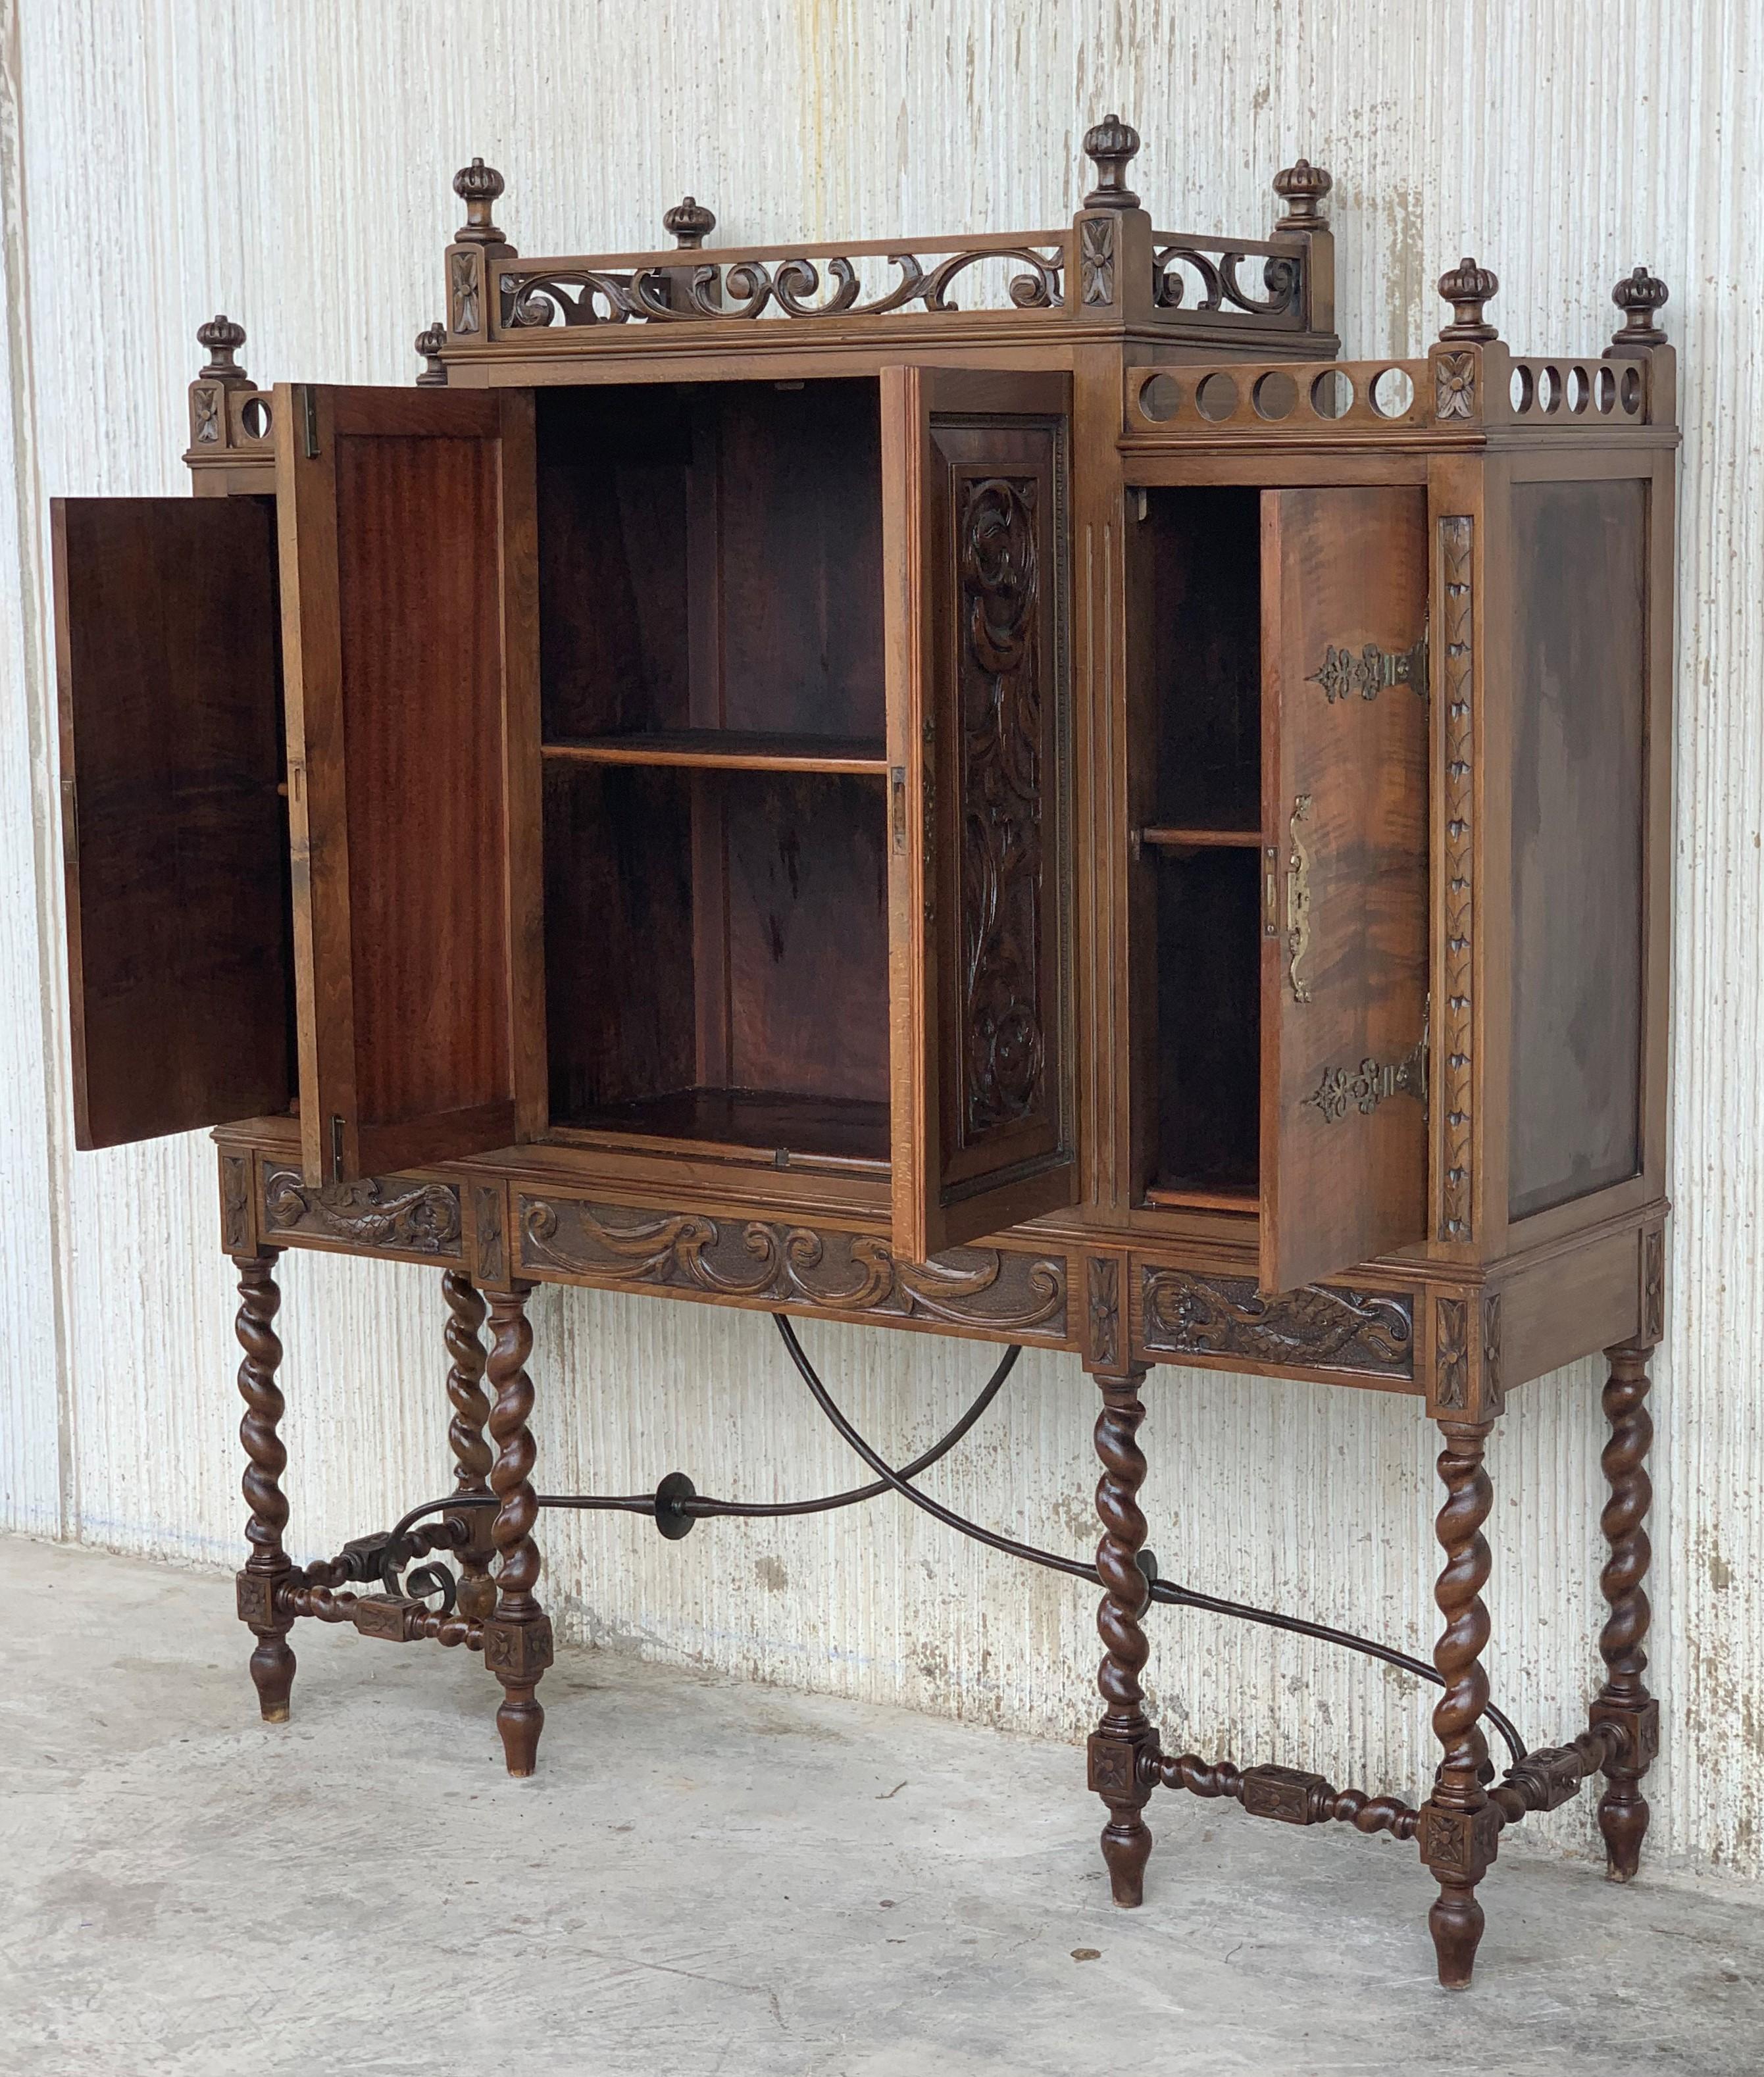 Spanish 19th Century Wood Carved Cupboard, Cabinet on Stand with Iron Stretcher